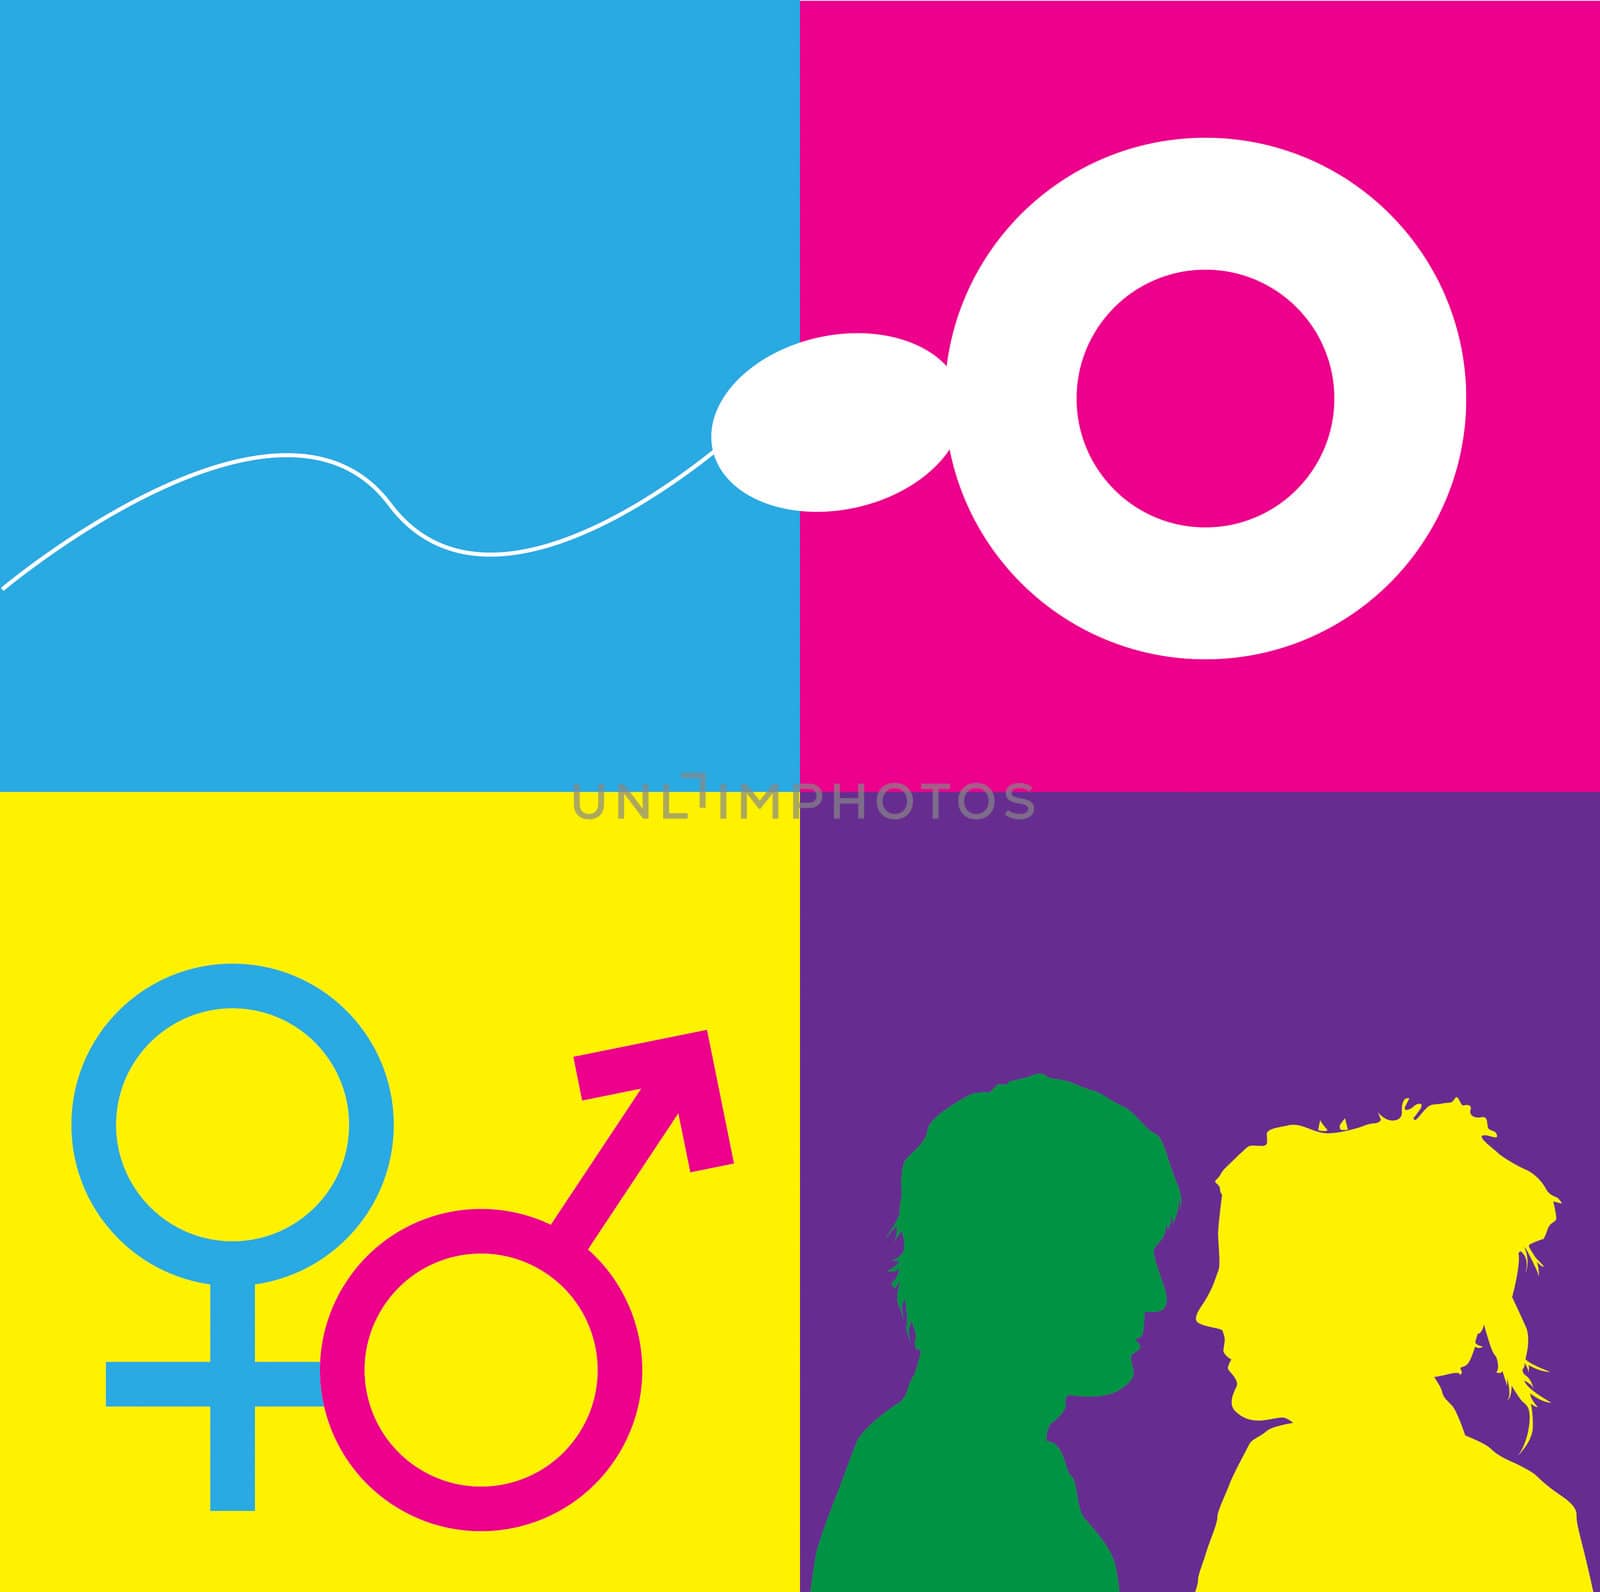 A graphic representation of sex, love and relationships between man and women in the context of sex education. Using text and graphics on bright colored blocks of color.